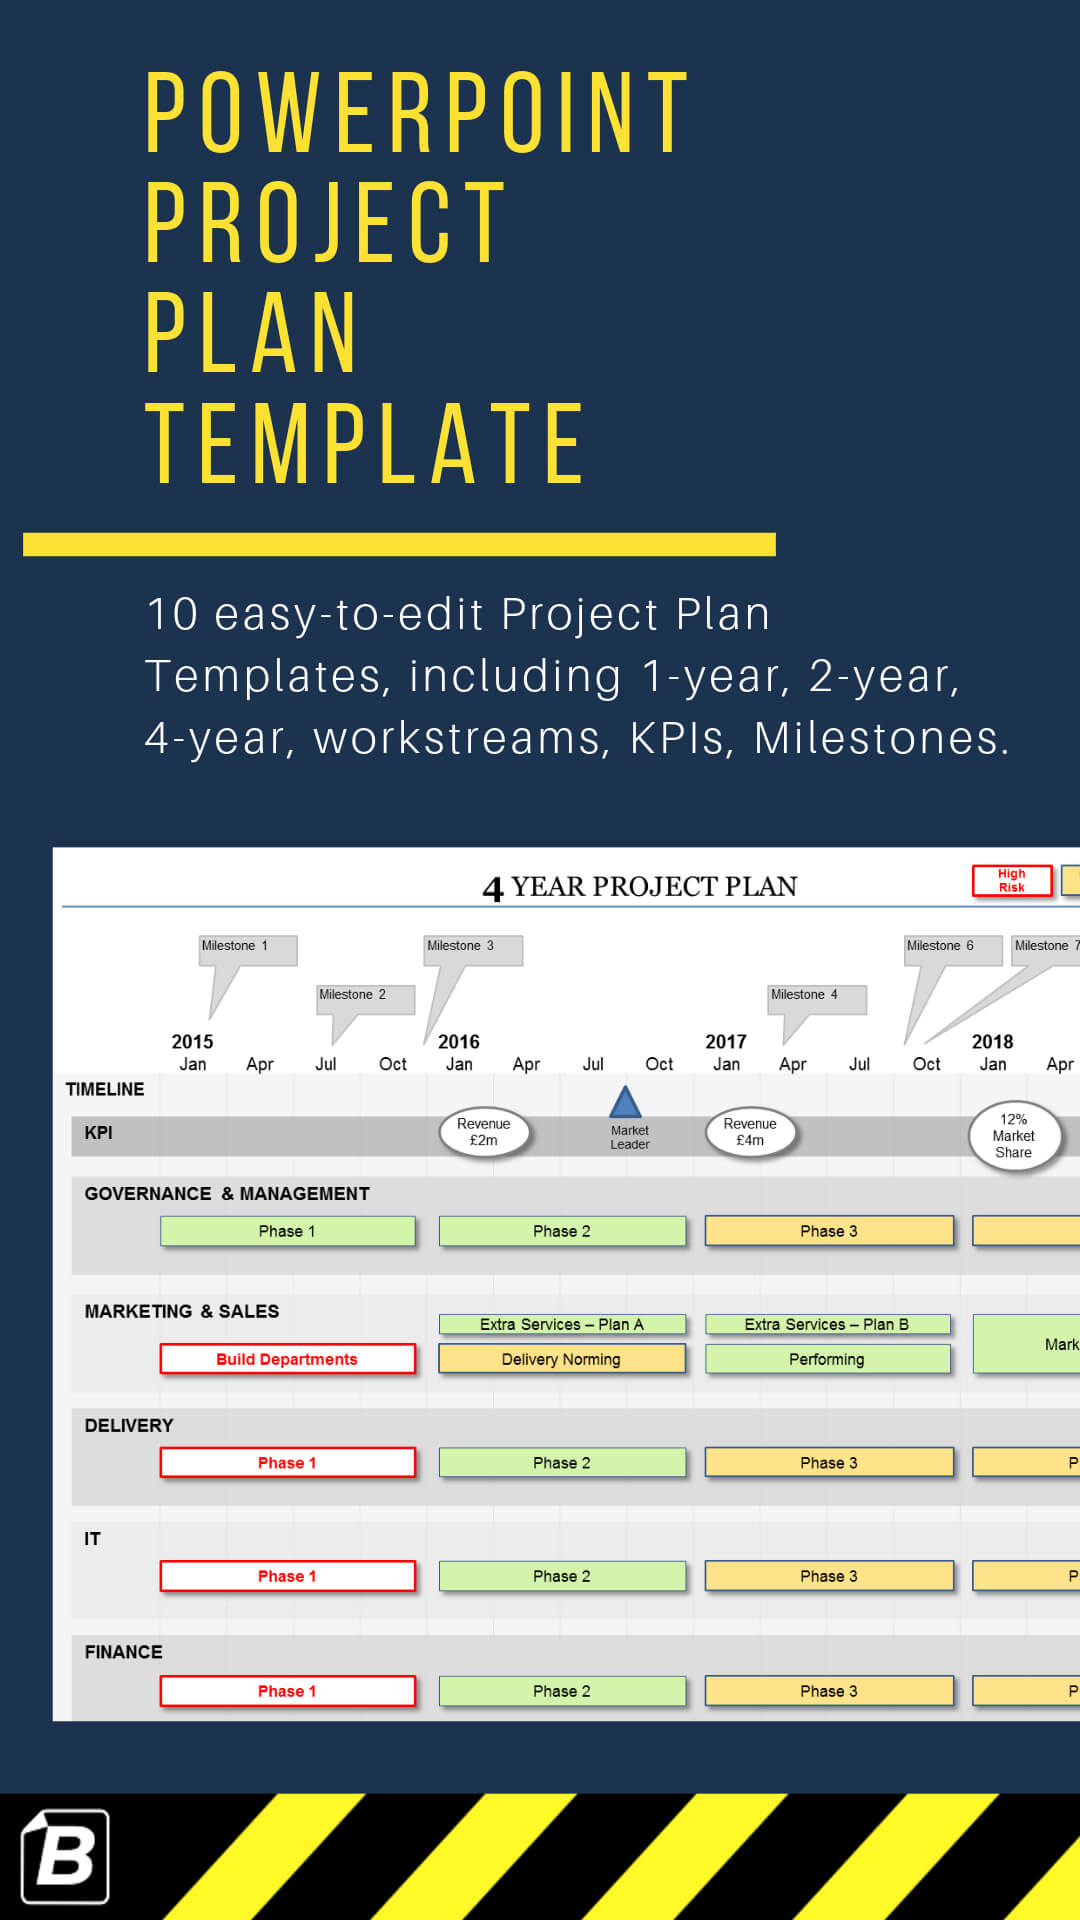 Powerpoint Project Plan Template | How To Plan, Projects With Project Schedule Template Powerpoint